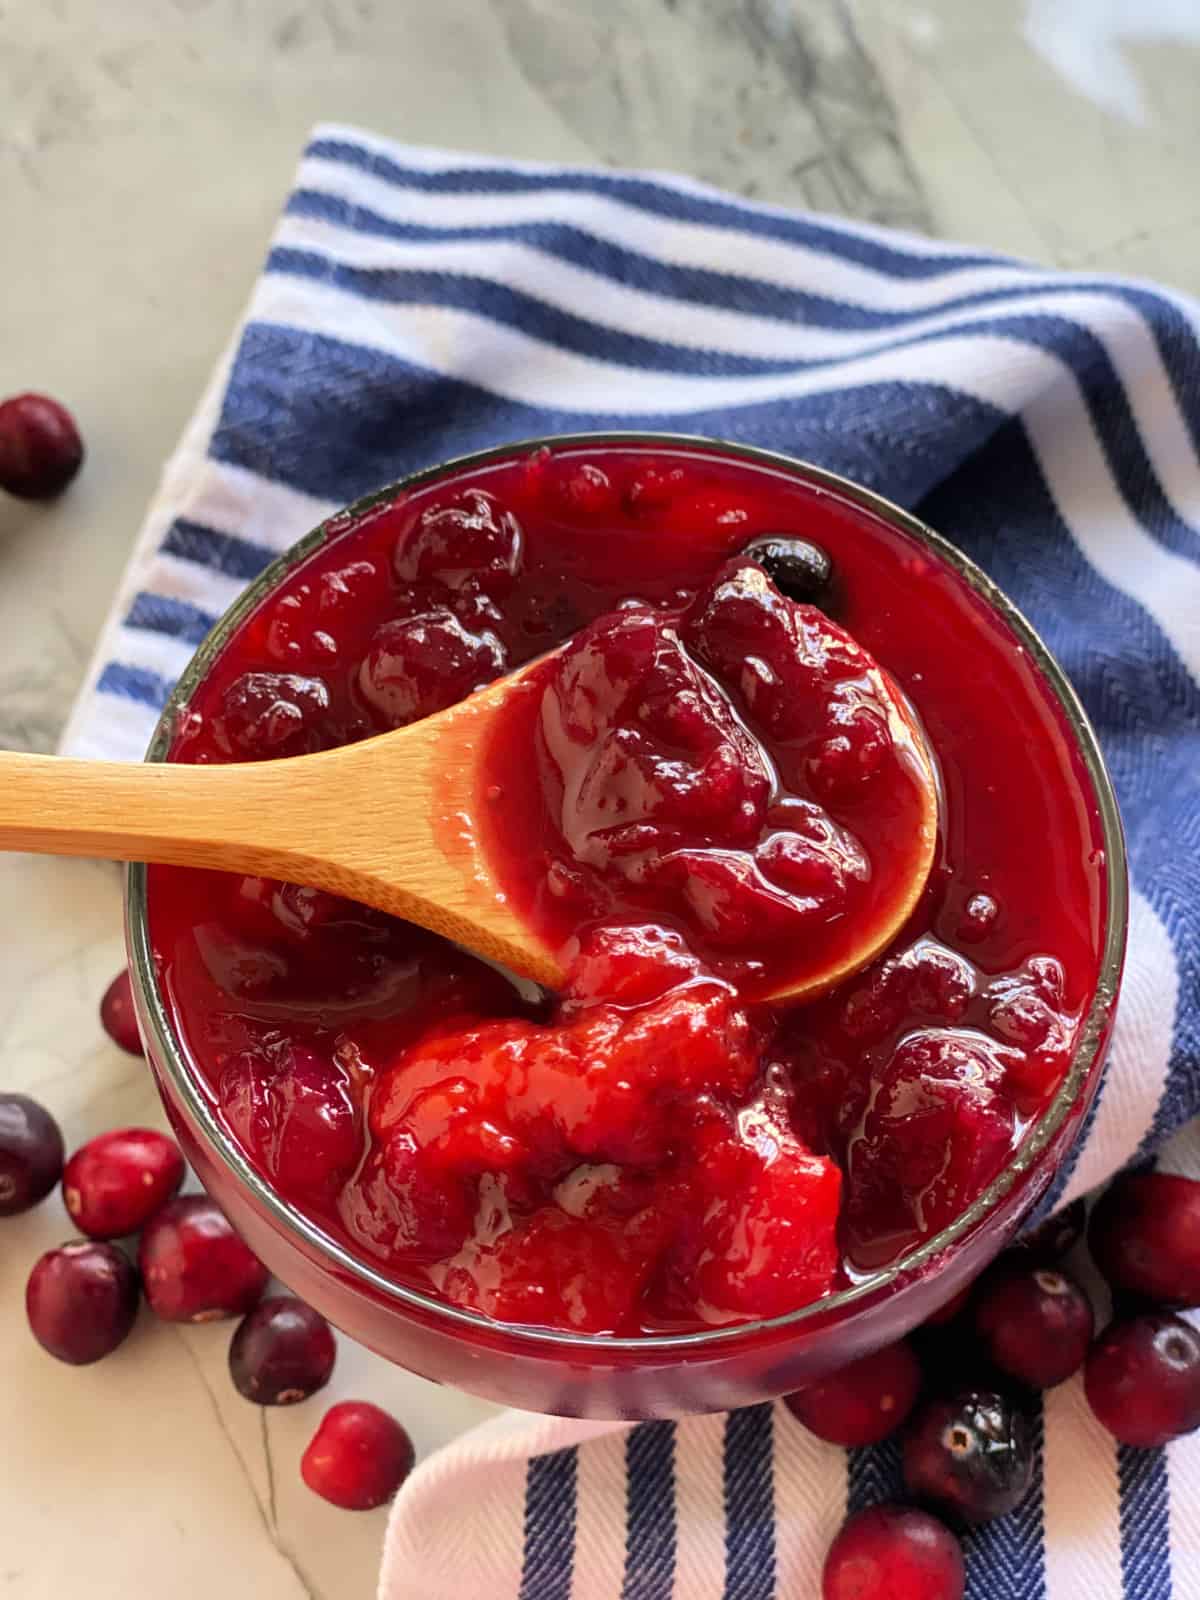 Wooden spoon dipped in a glass bowl filled with cranberry sauce.